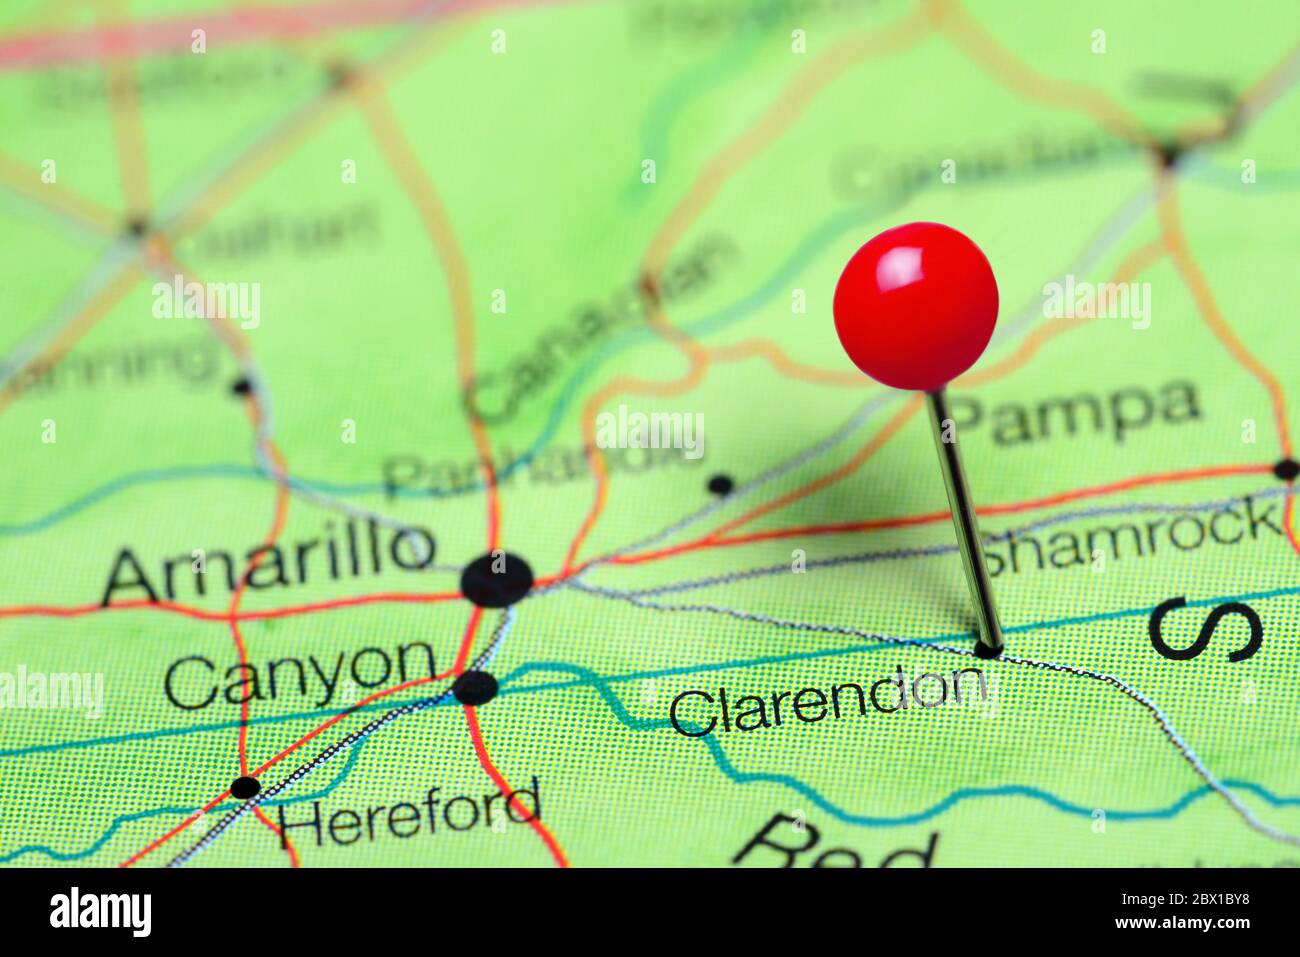 Clarendon pinned on a map of Texas, USA Stock Photo